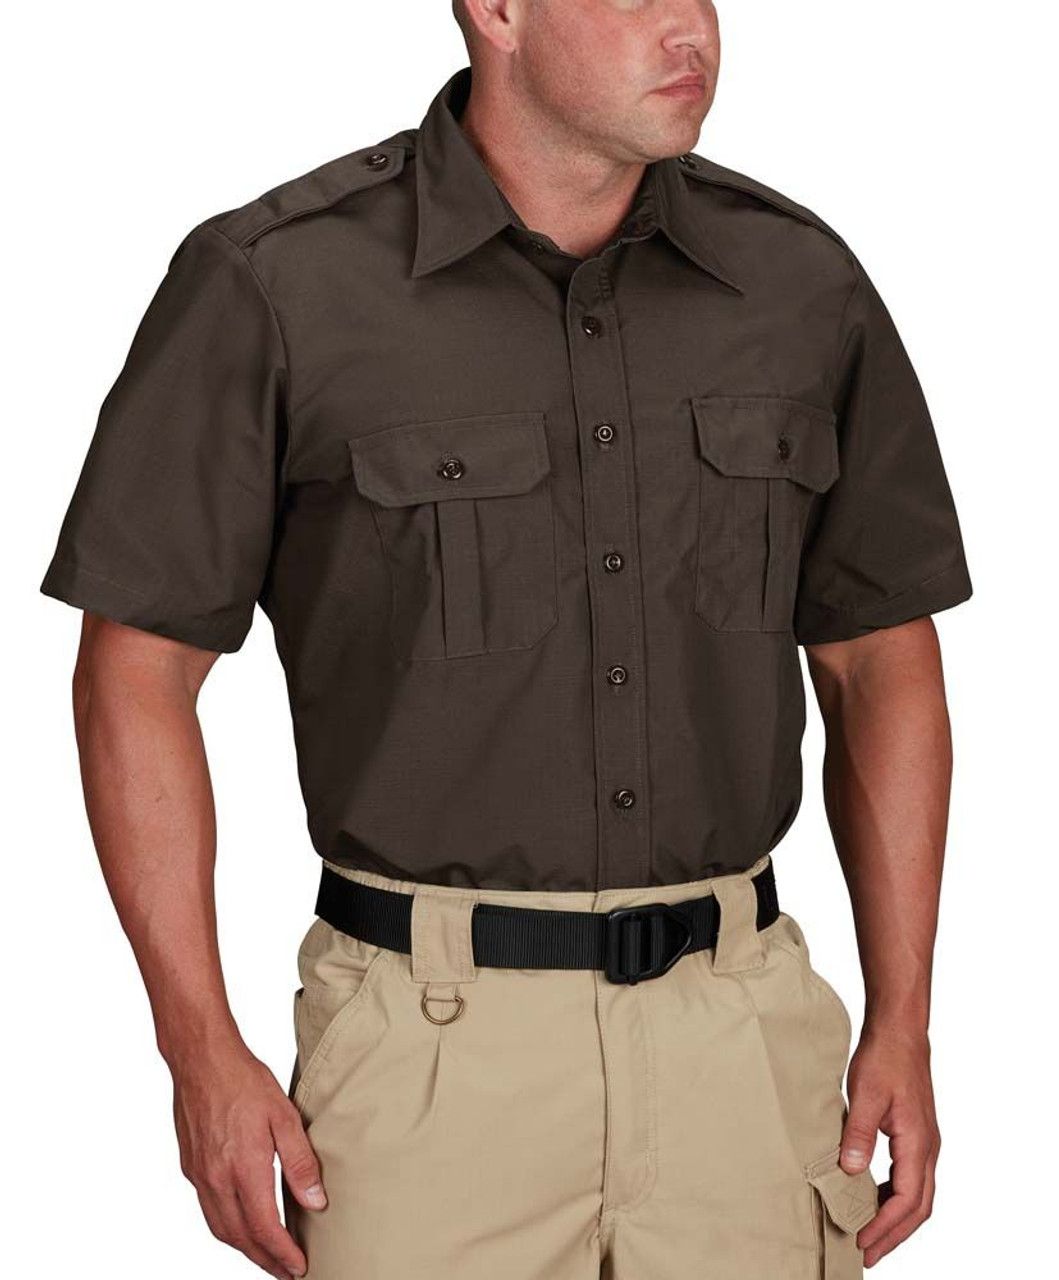 Propper F5301, Tactical Short Sleeve Button-Down Uniform Shirt, 2 Chest Pockets, Badge Tab, Polyester/Cotton